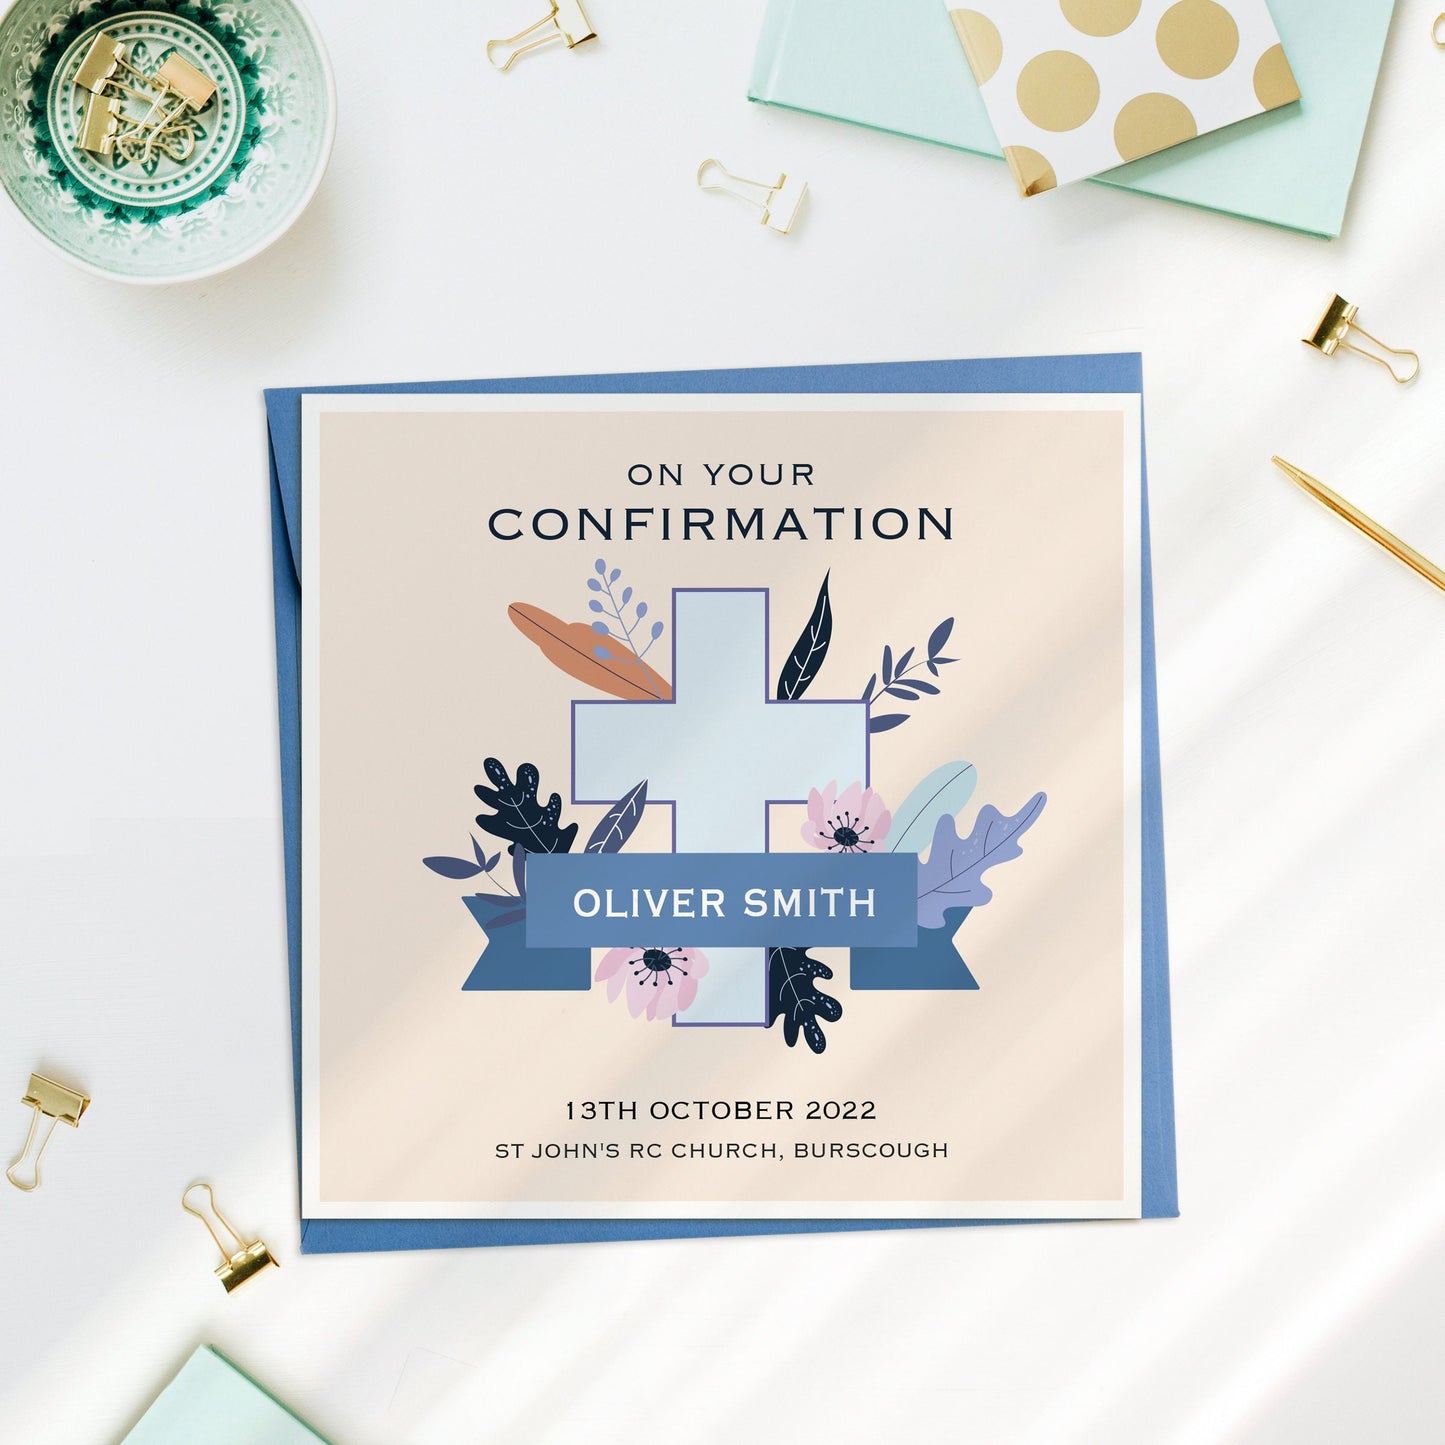 Personalised Confirmation Card for Girls, Confirmation Card for Boys, Confirmation Card Granddaughter, Confirmation Card Grandson, Niece